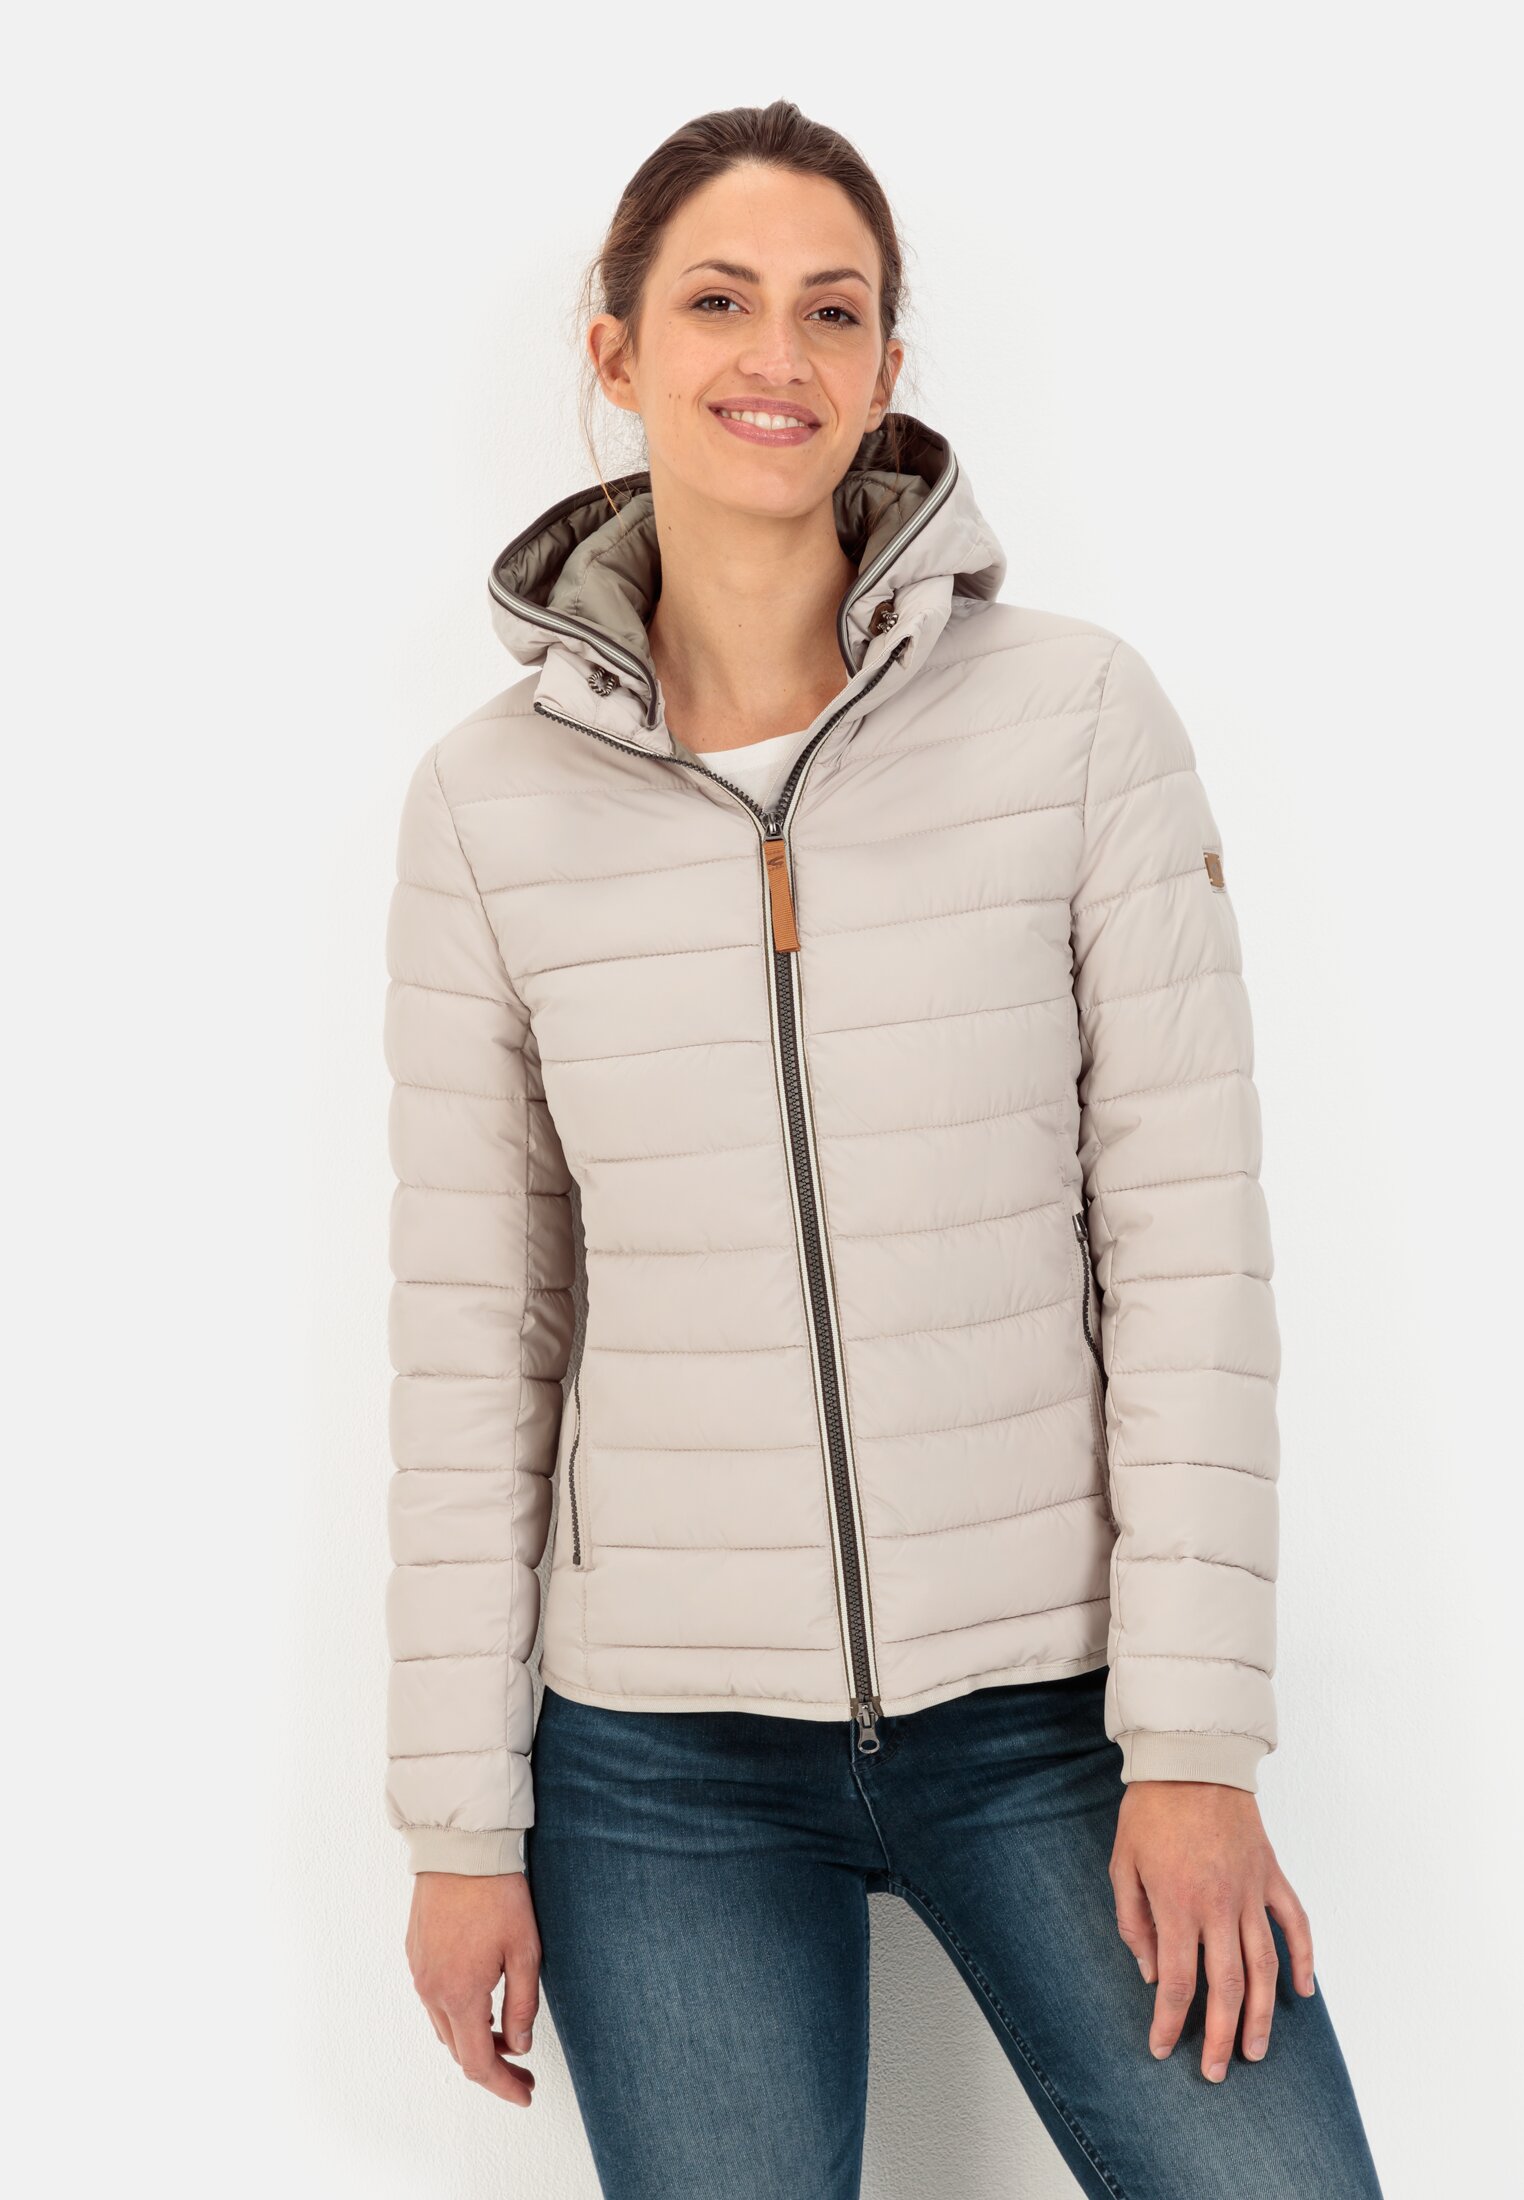 Quilted jacket for Damen in Almond | 34 | camel active